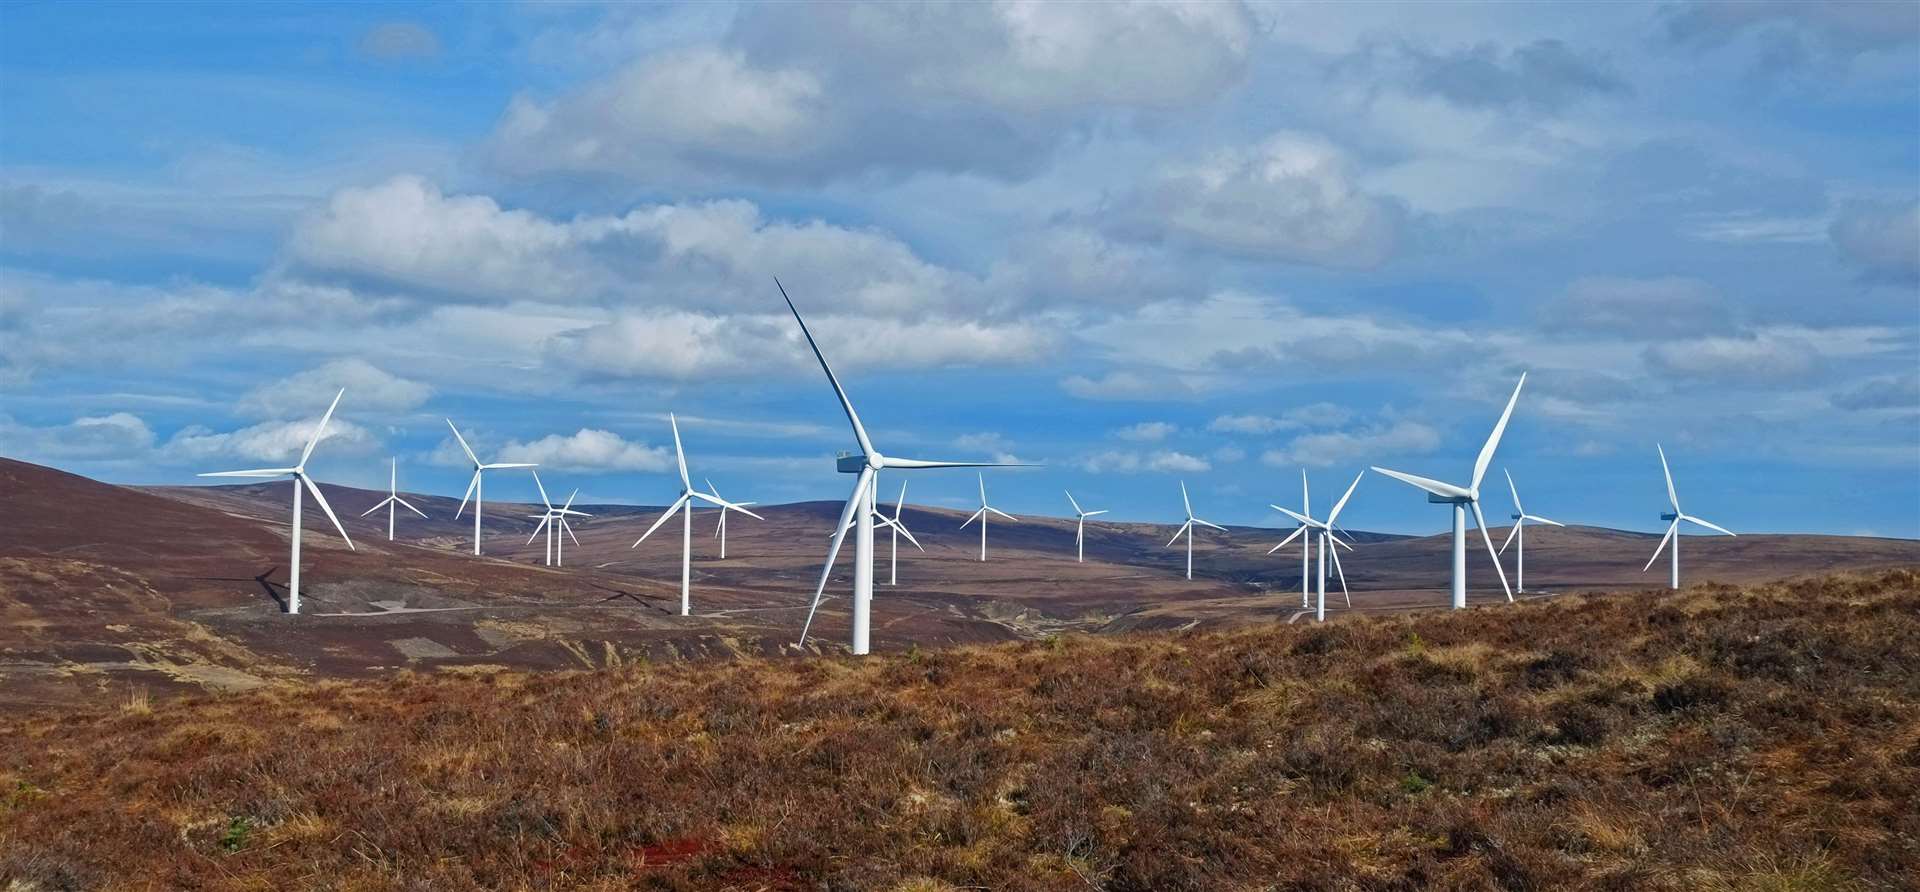 The re-introduction of Contracts for Difference eligibility for onshore wind is one of the positive developments for the sector over the last year.